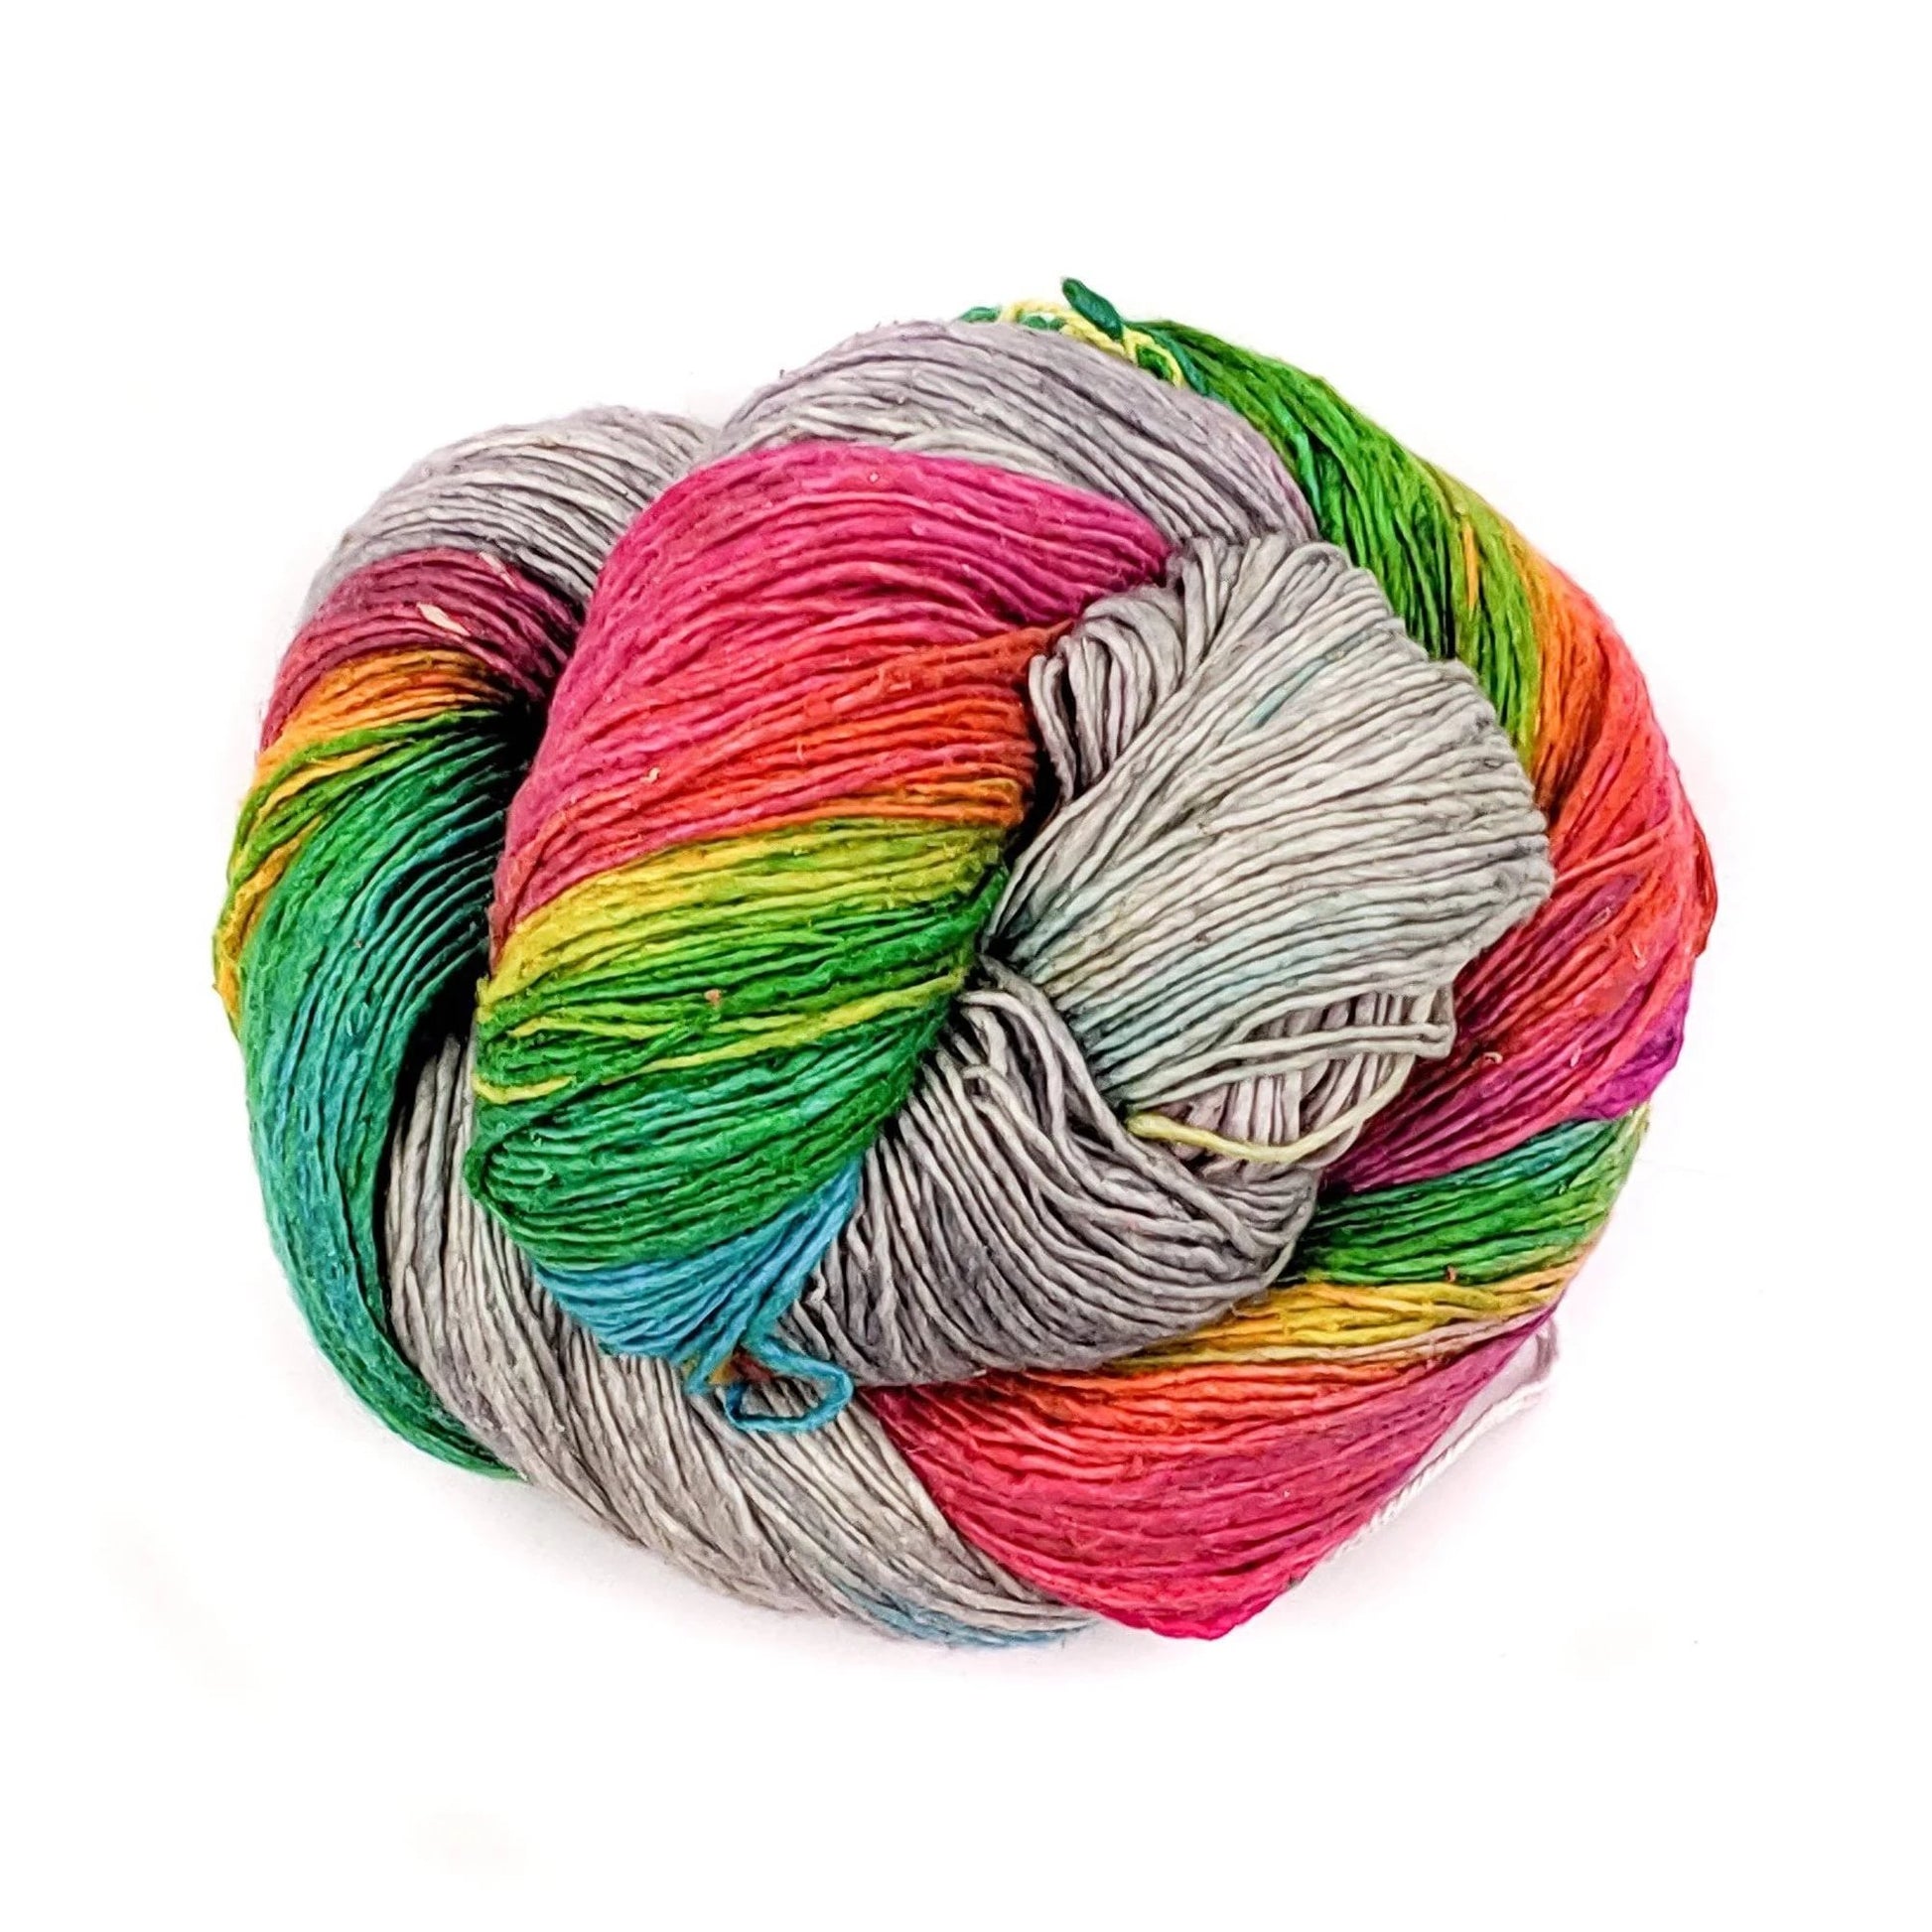 a skein of lace weight silk yarn in grey and multi colors